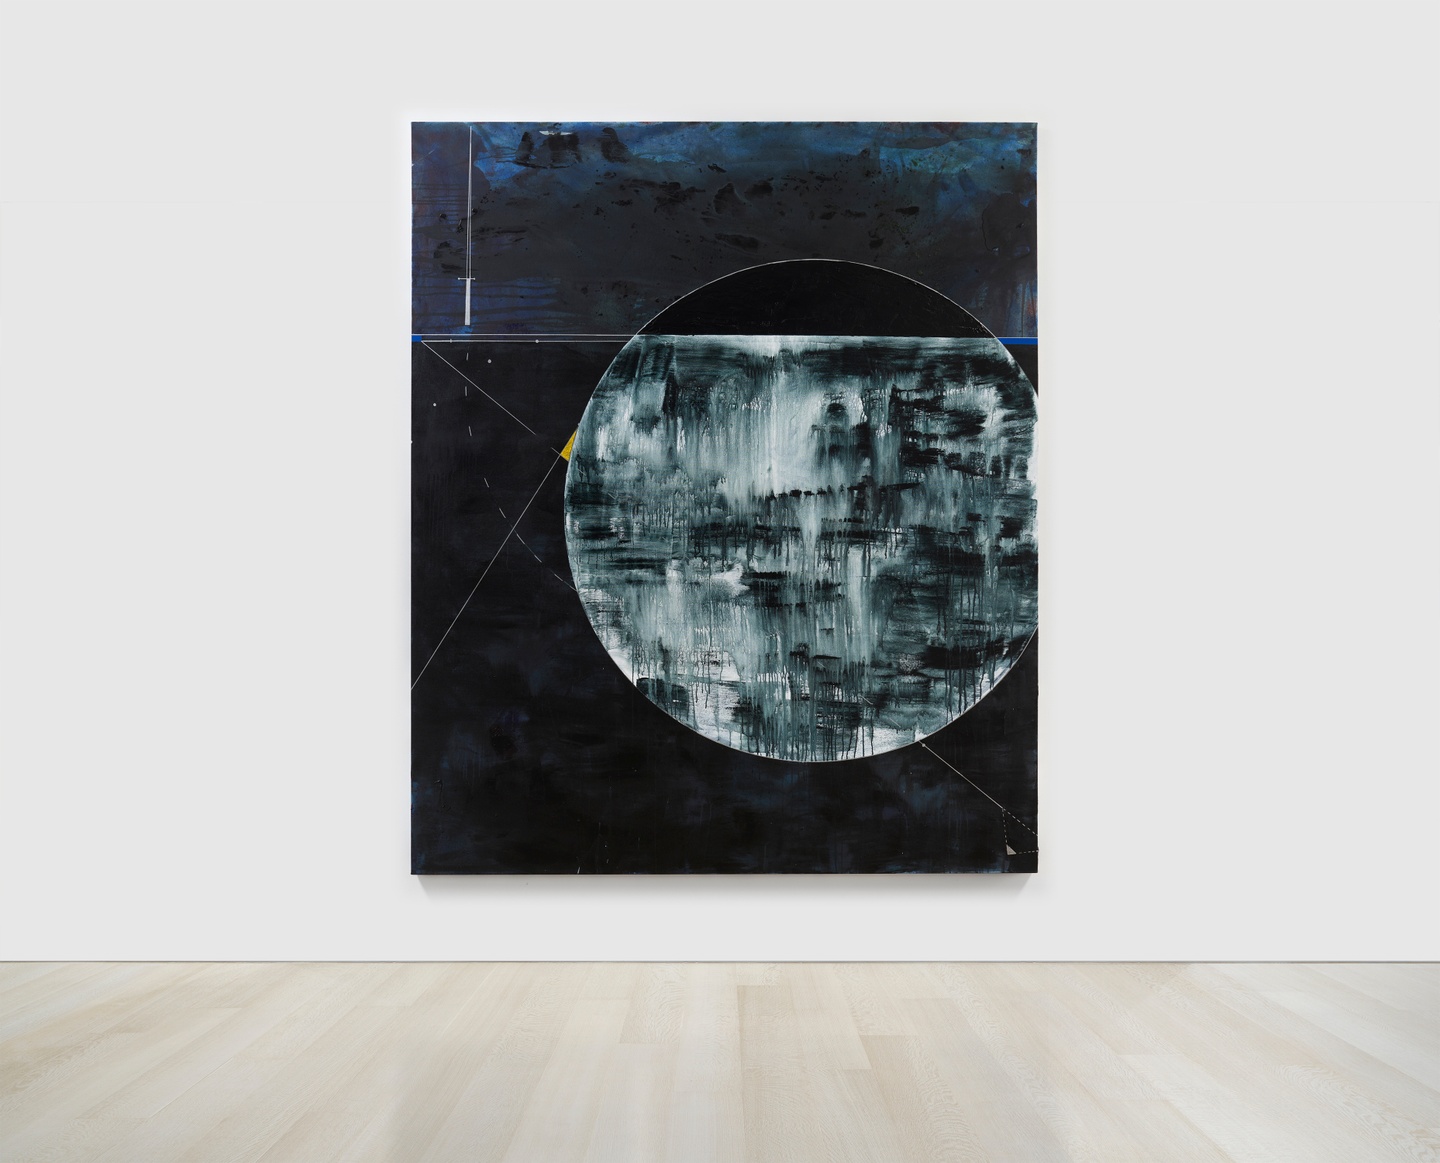 An abstract painting with geometric shapes, including a large circle, in mostly blues and grays